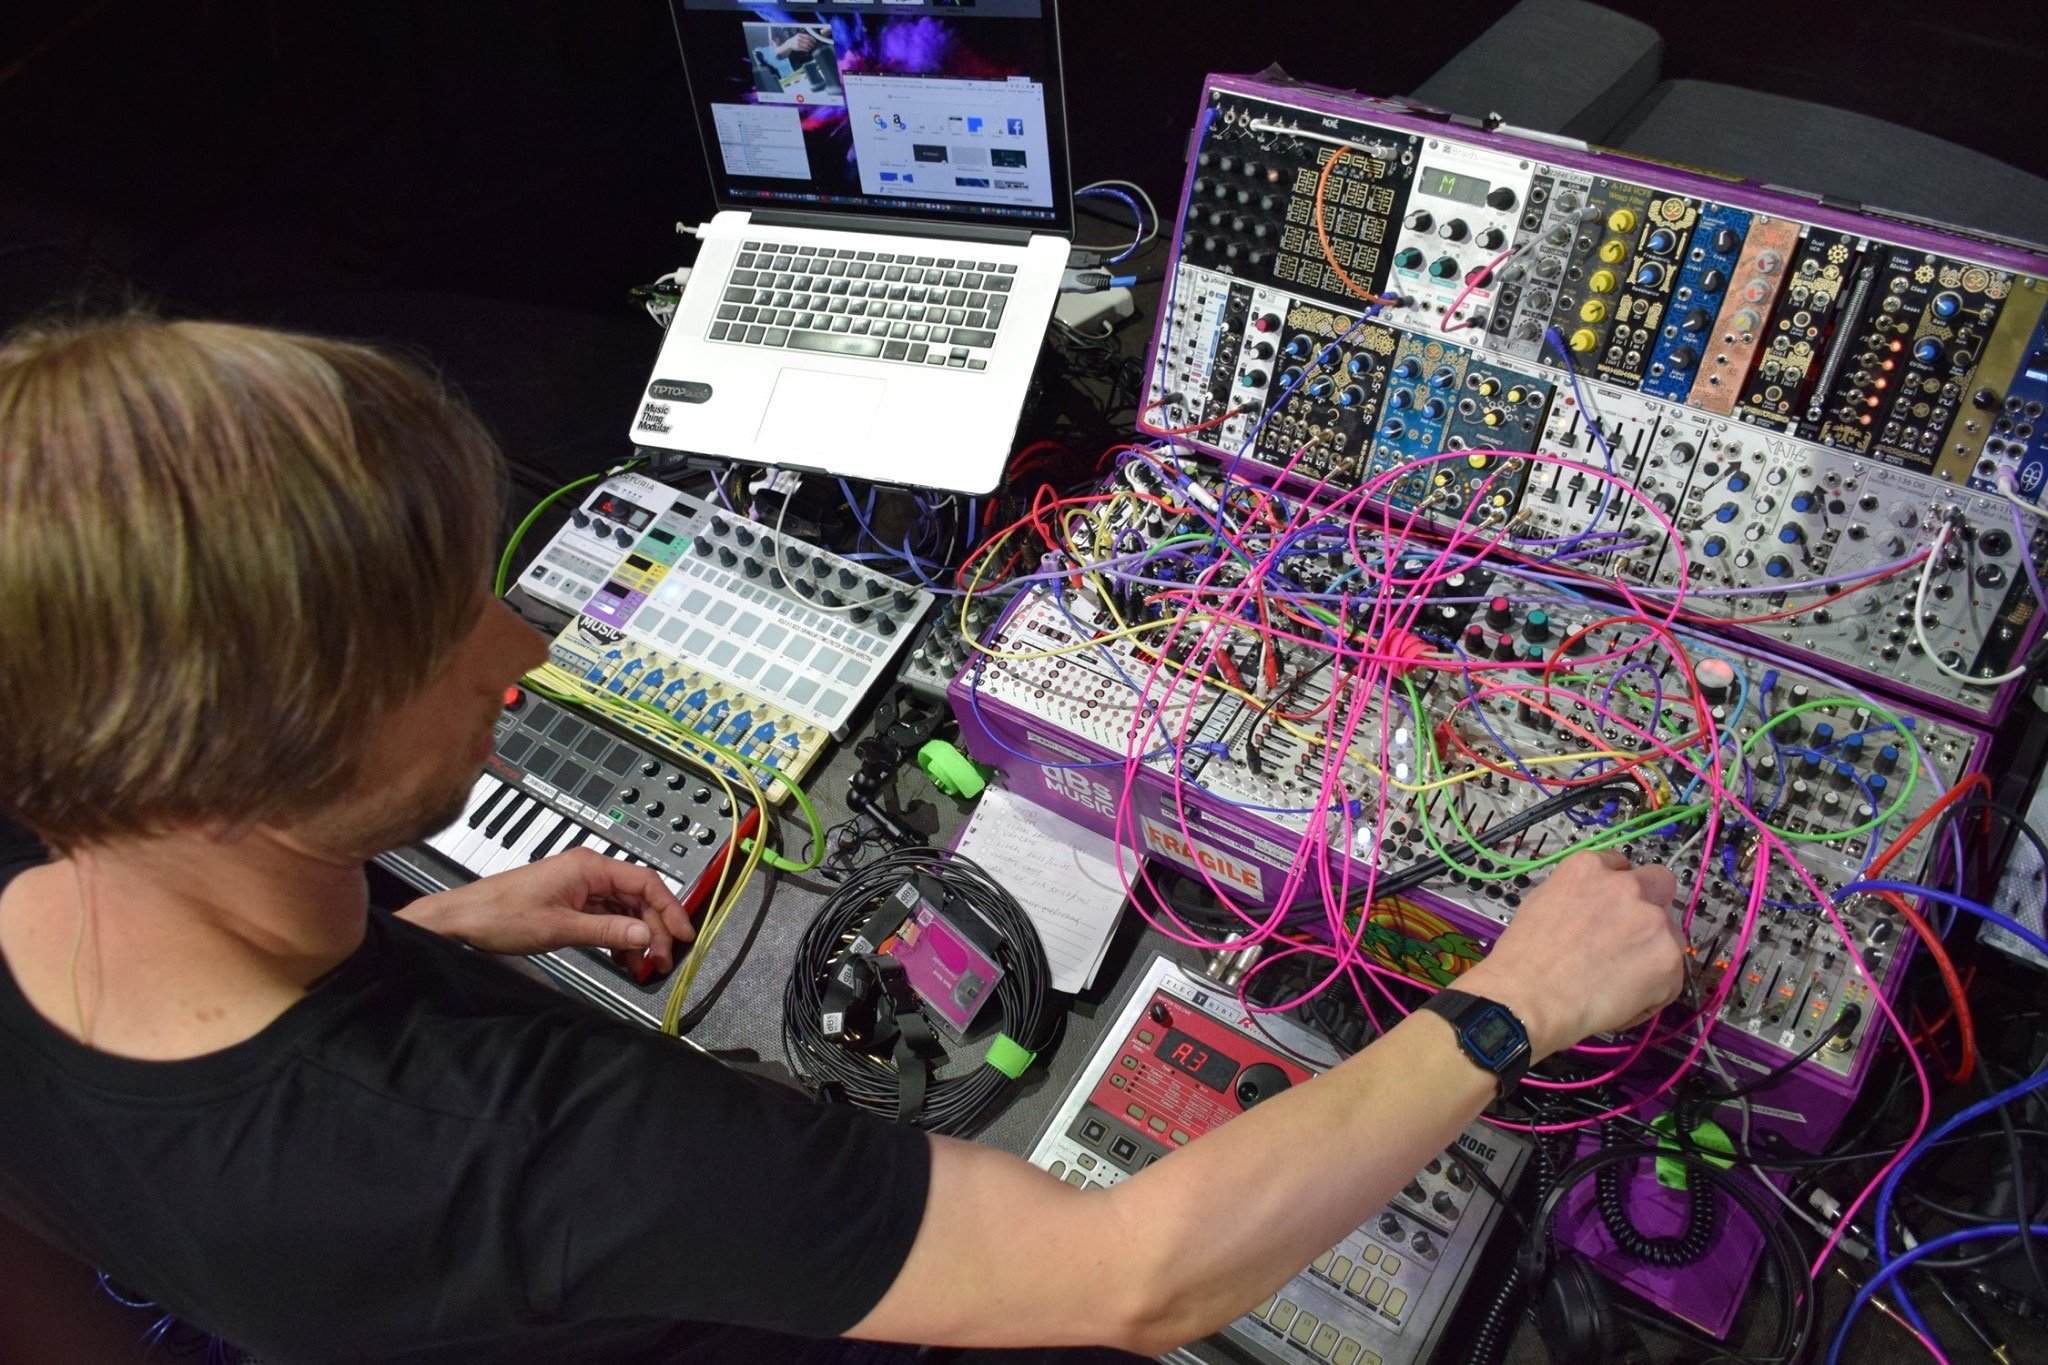 Electronic music production tutor at dBs Institute Matt Ward playing on modular synthesizer